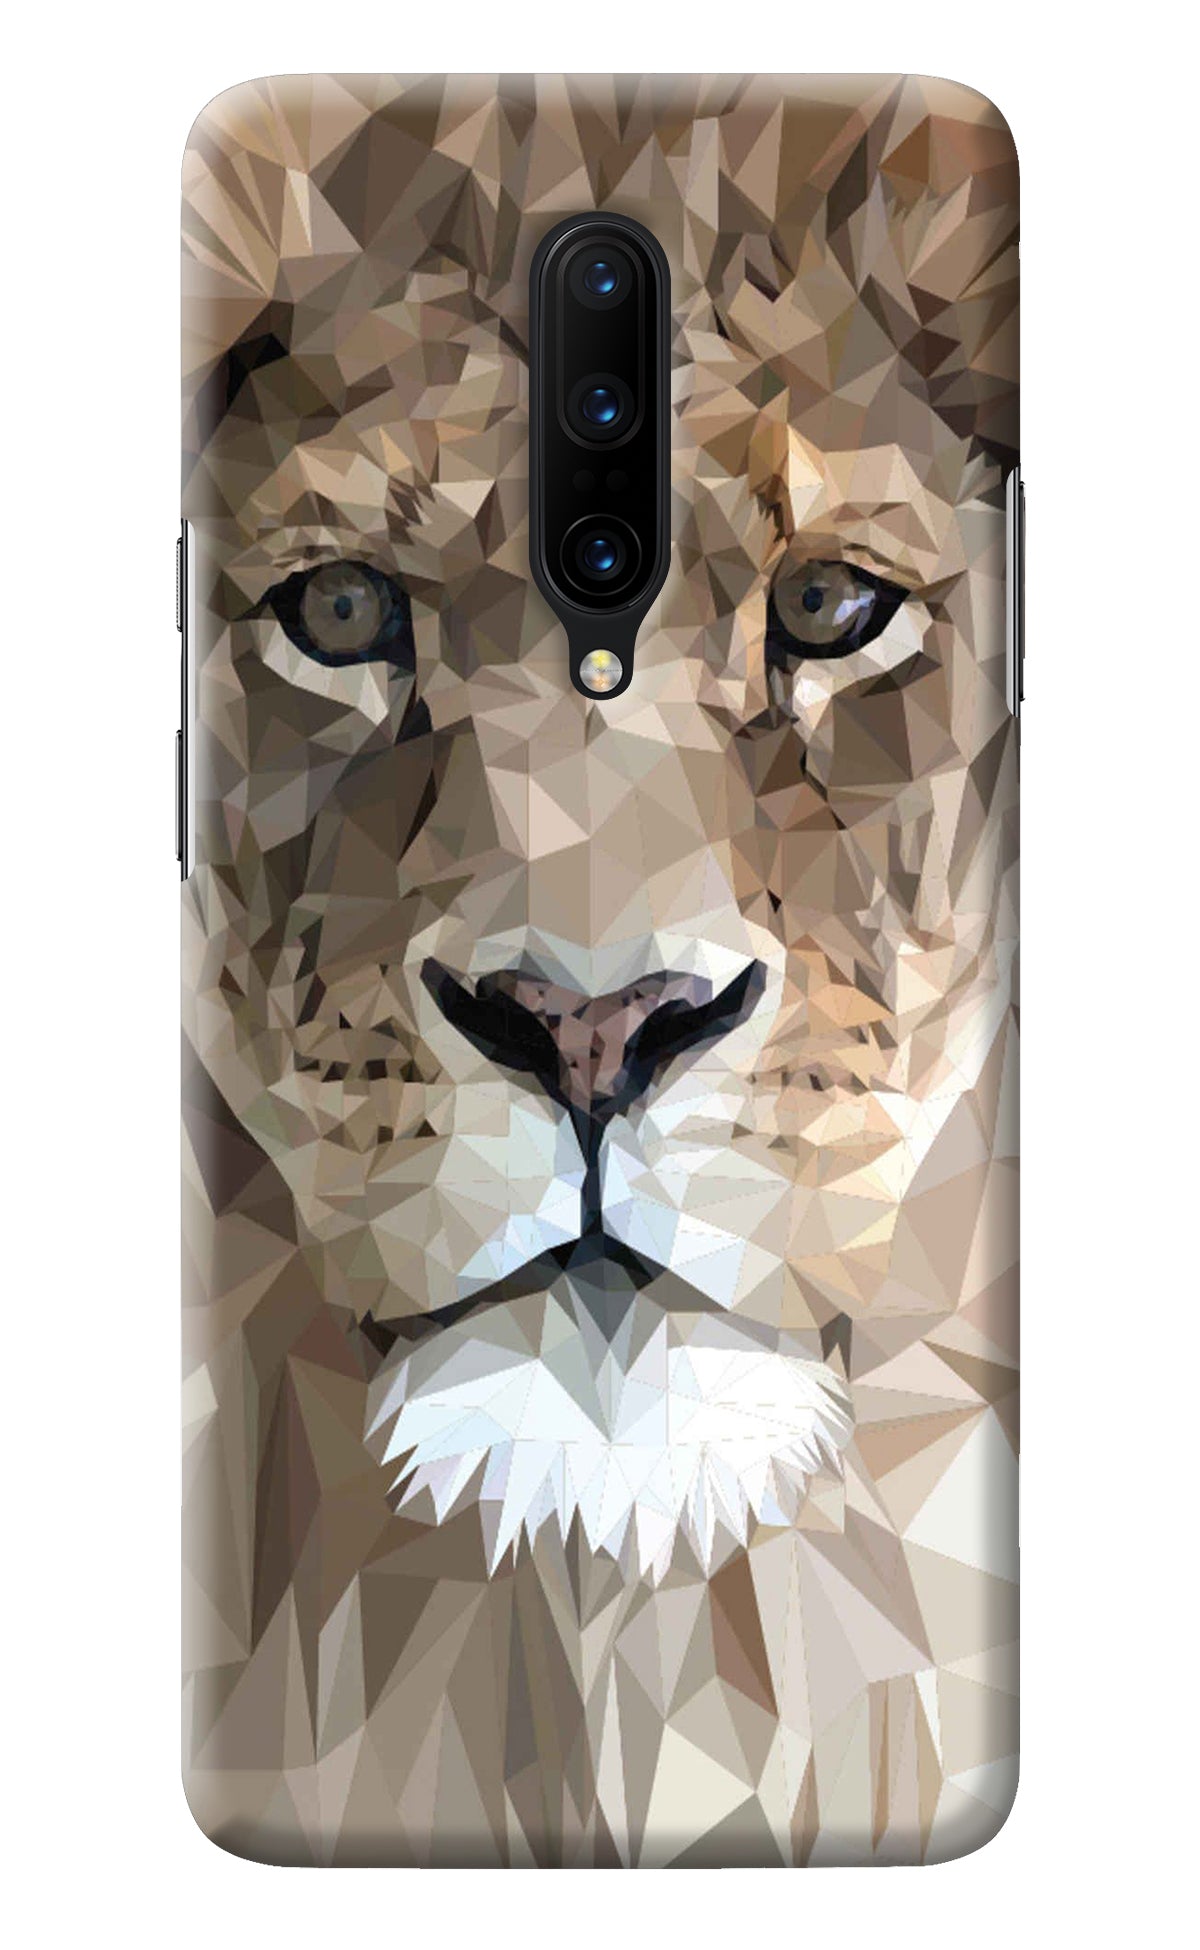 Lion Art Oneplus 7 Pro Back Cover